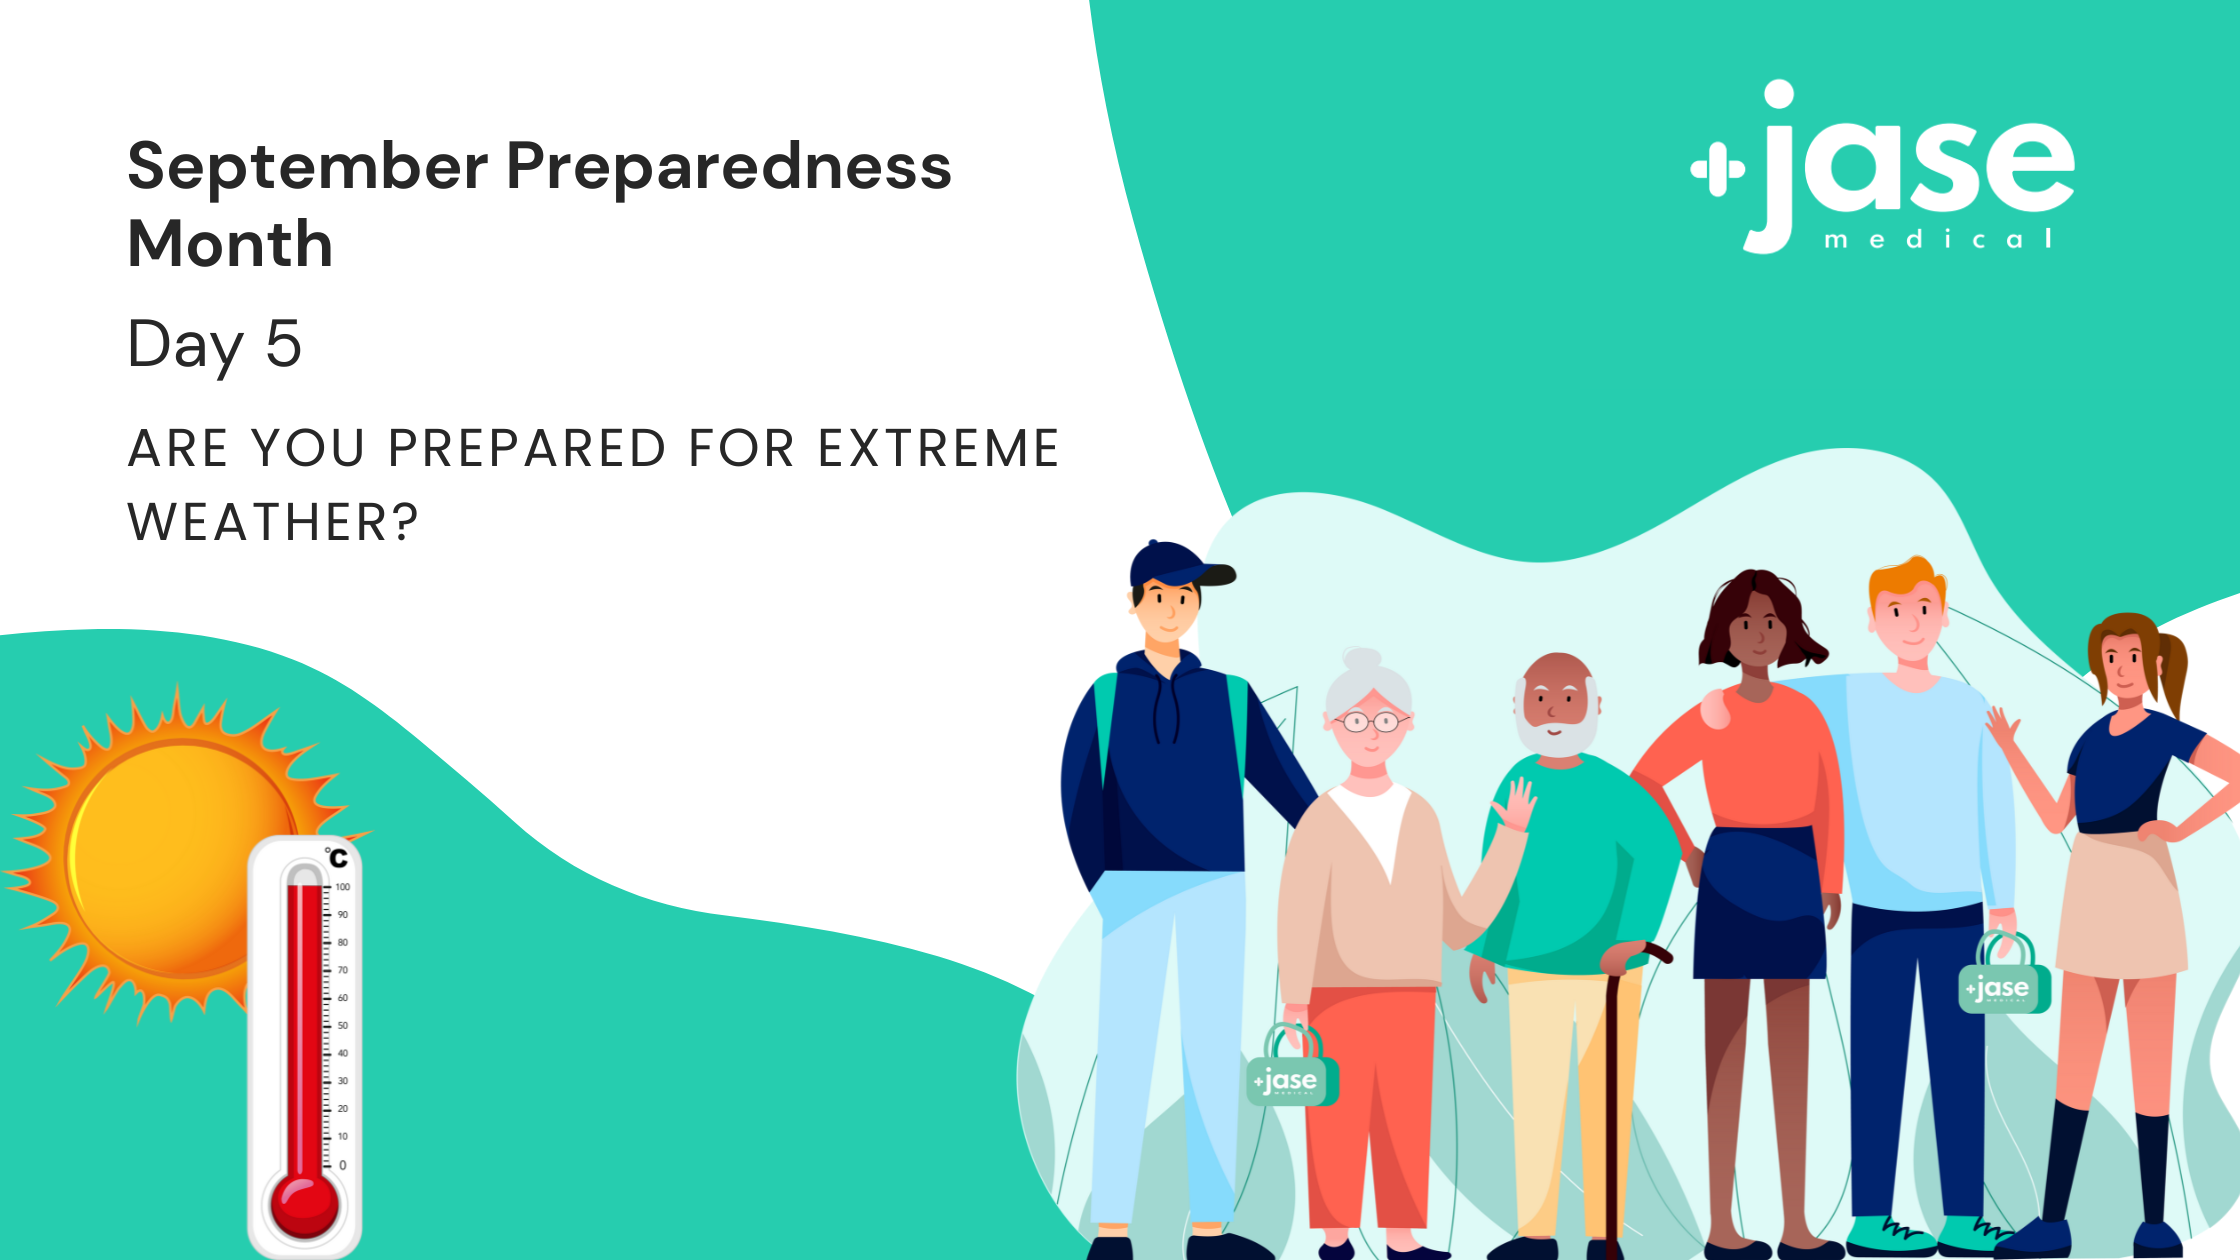 Are you Prepared for Extreme Weather?